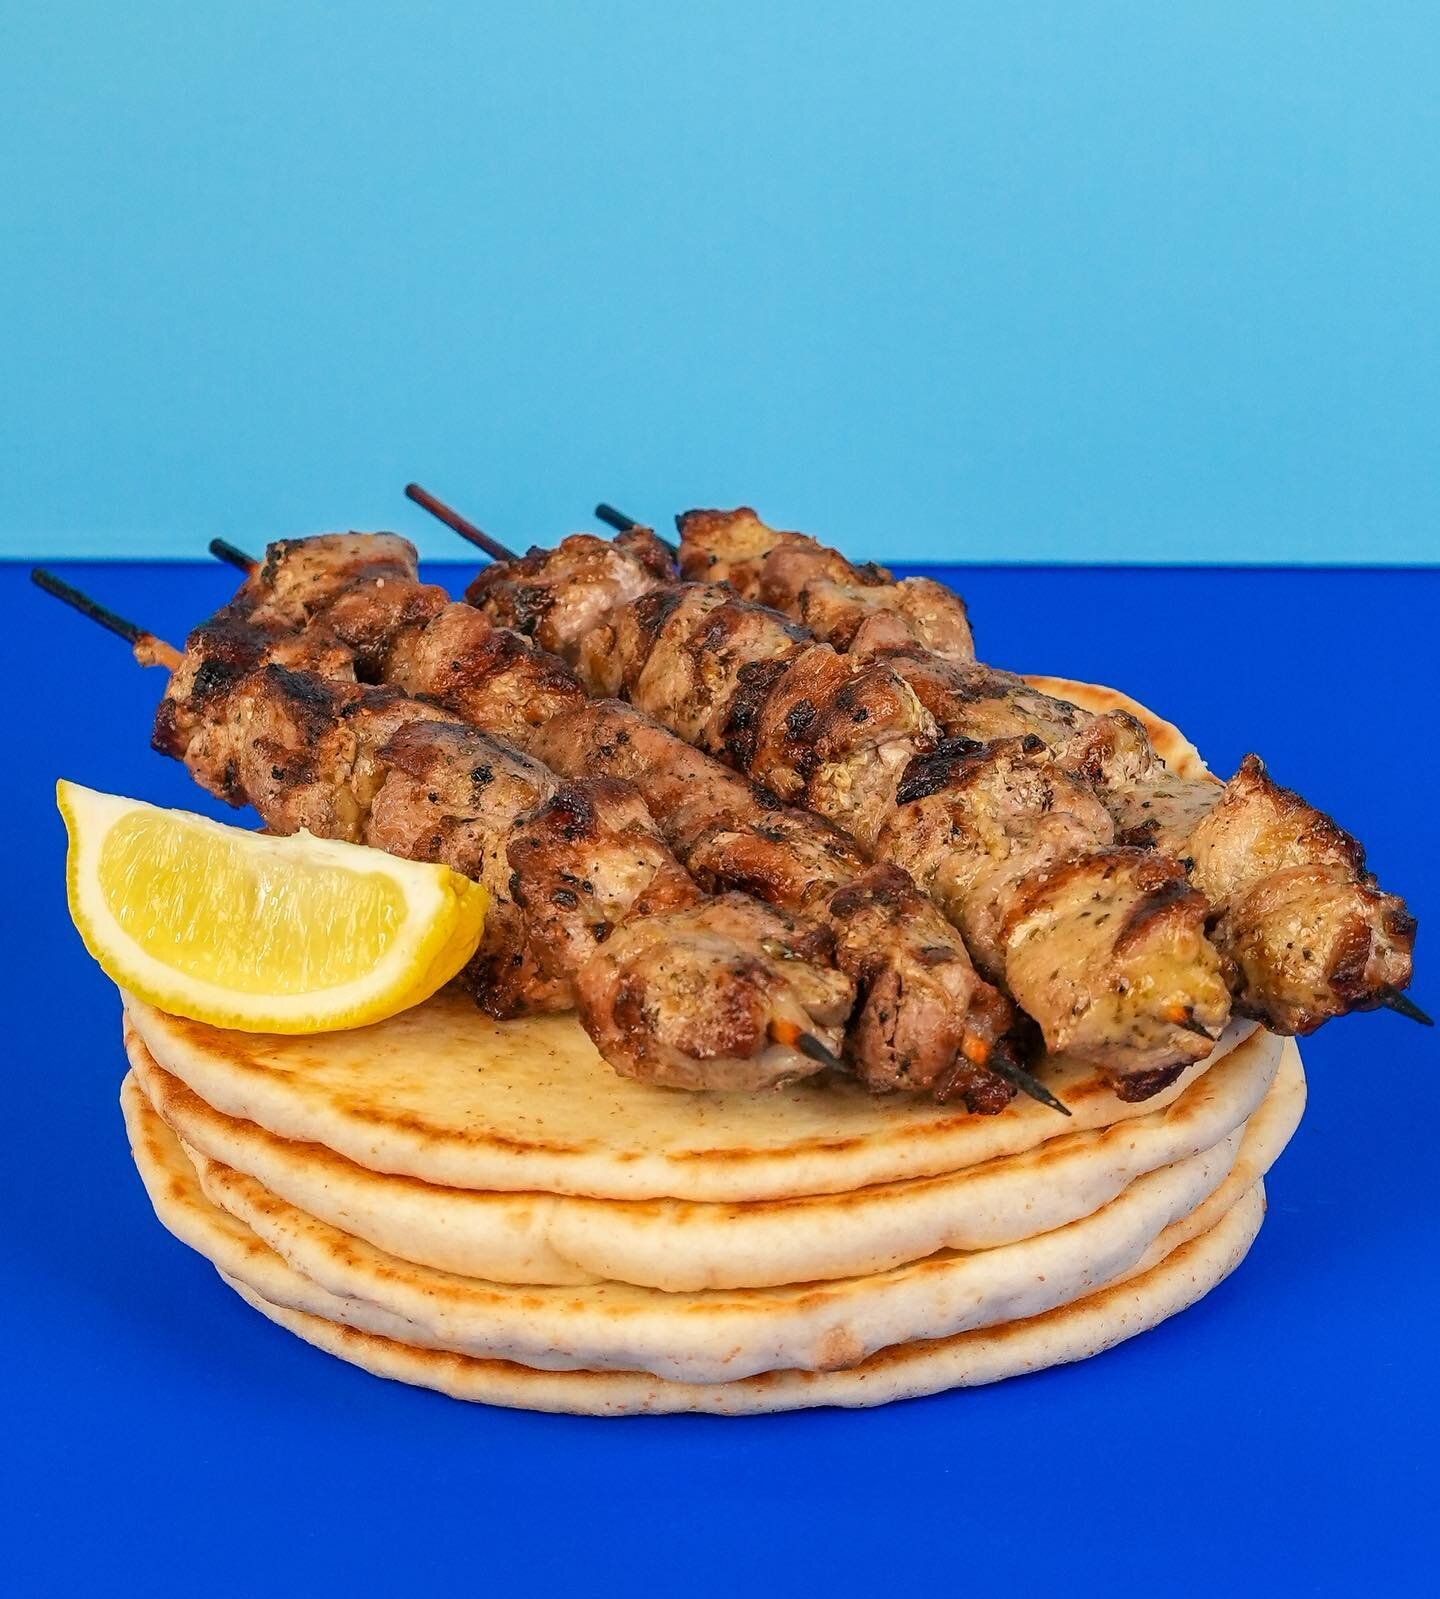 Did someone say Souvlaki? Come try it for yourself and pair it with one of our signature sauces that are sure to make your mouth water 🤤

-

#nickthegreek #souvlaki #gyros #greekfood #foodie